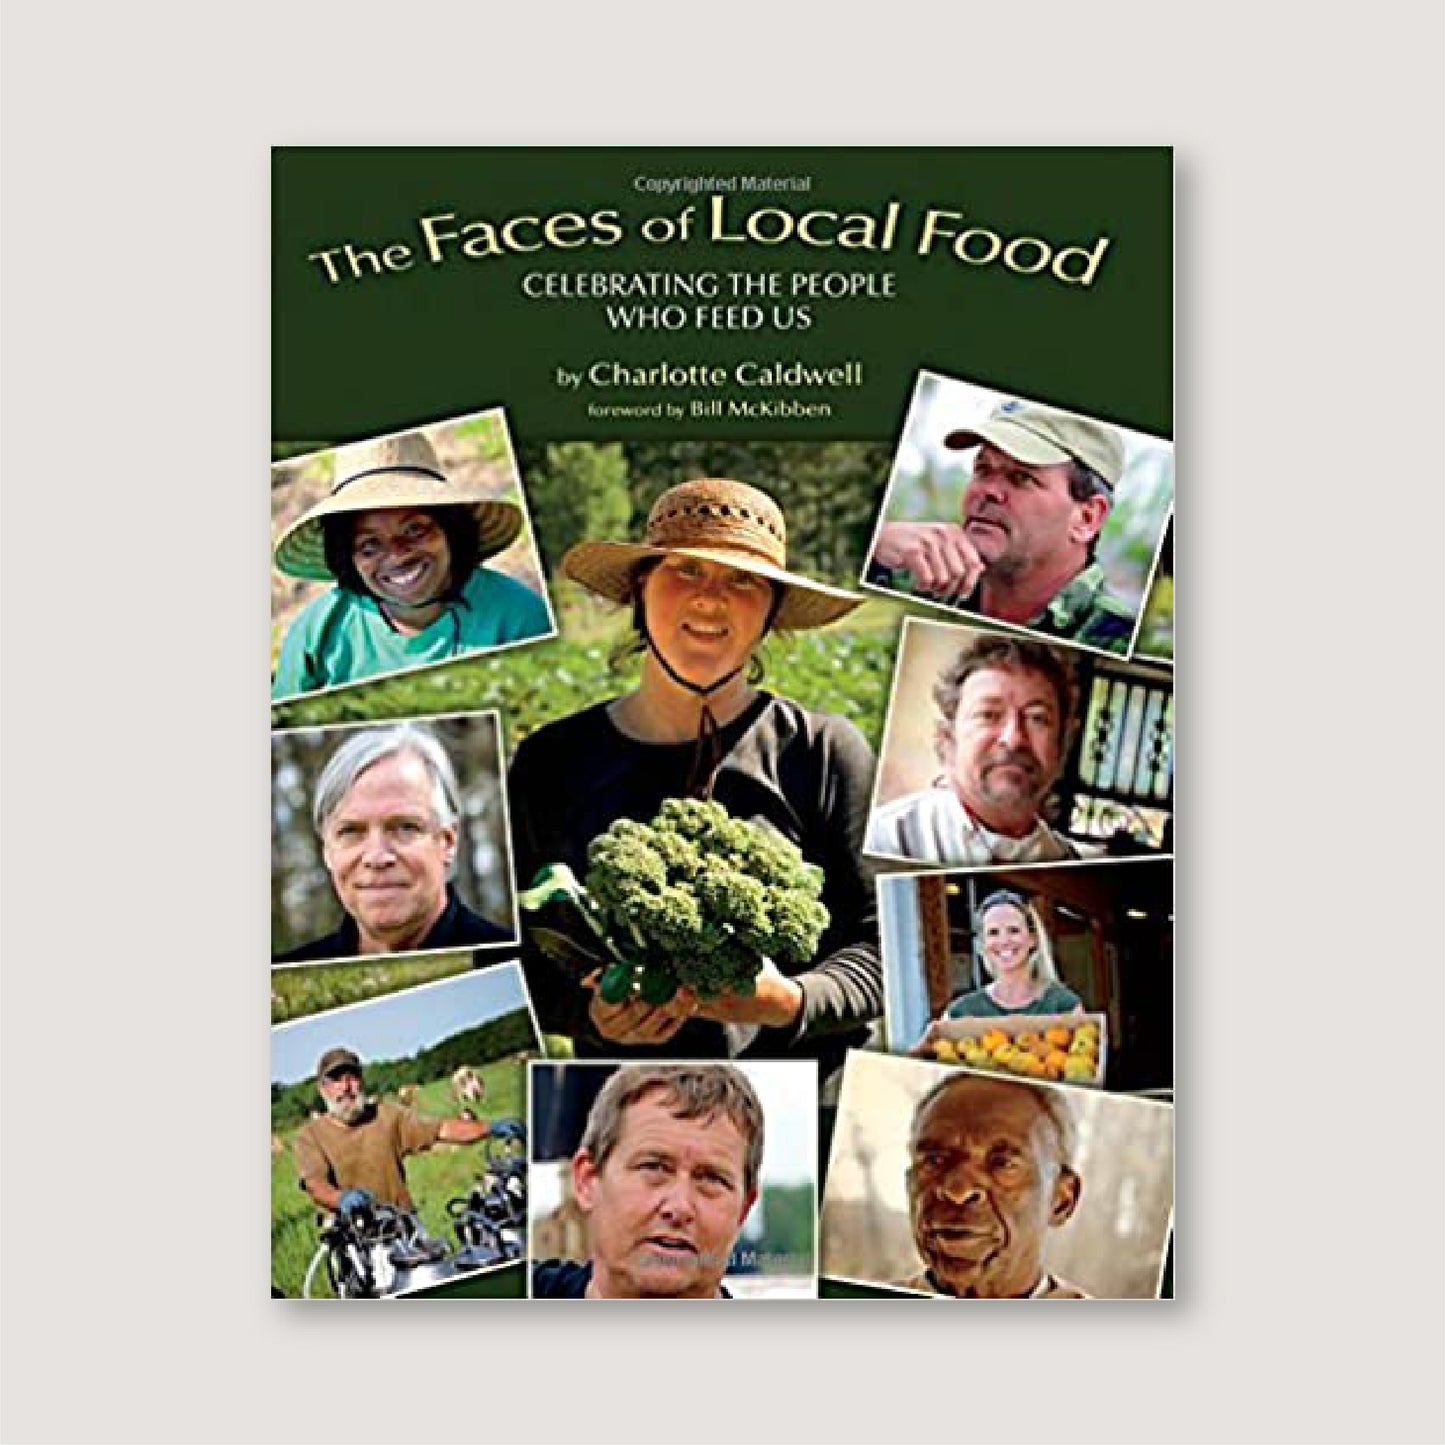 The Faces of Local Food by Charlotte Caldwell